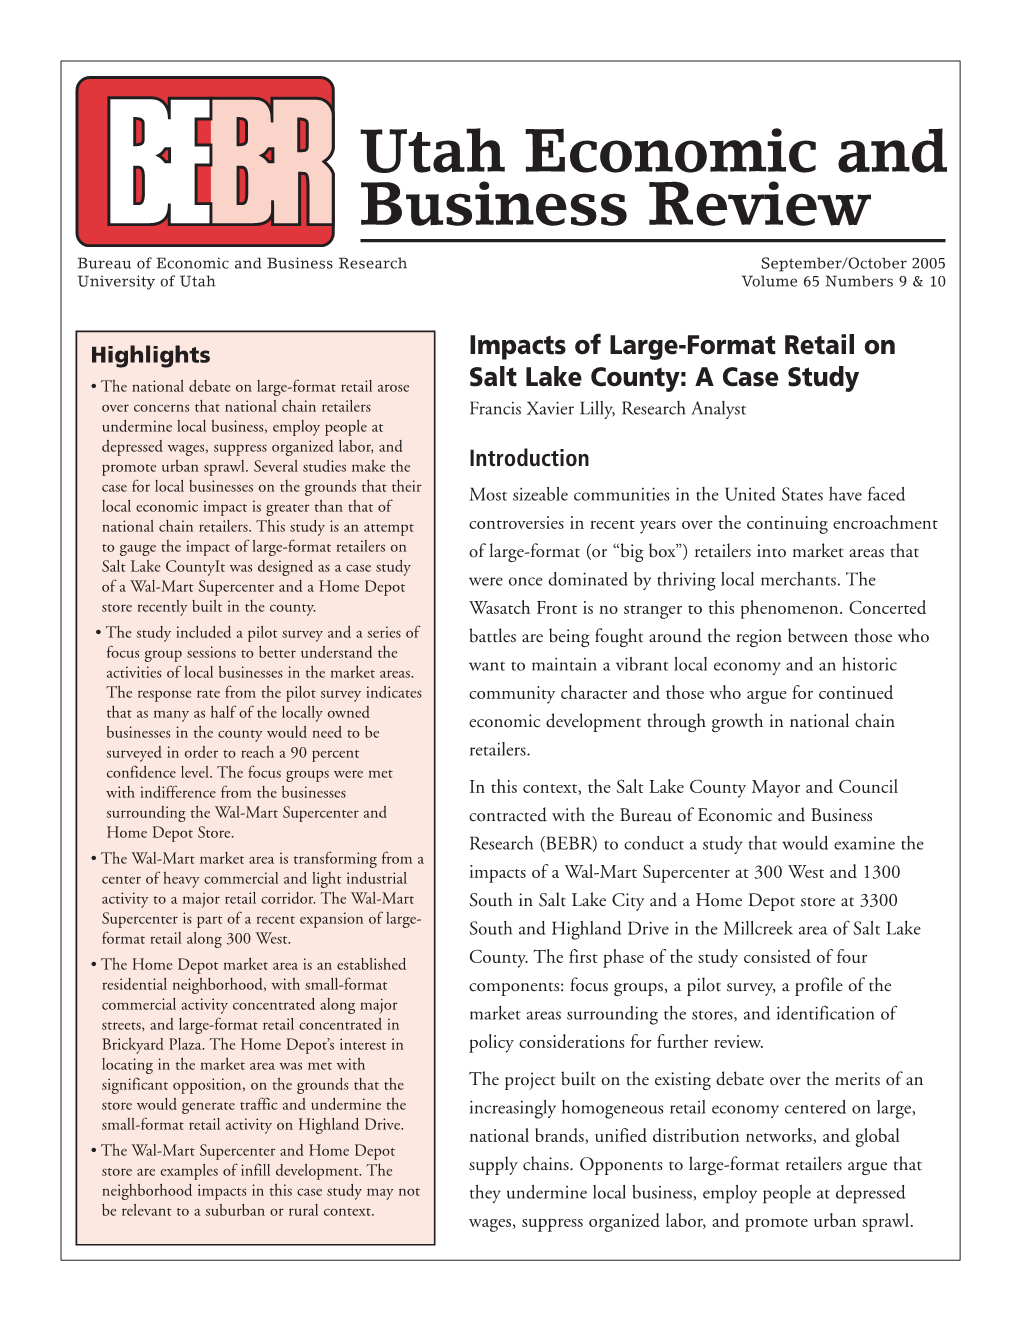 Impacts of Large-Format Retail on Salt Lake County